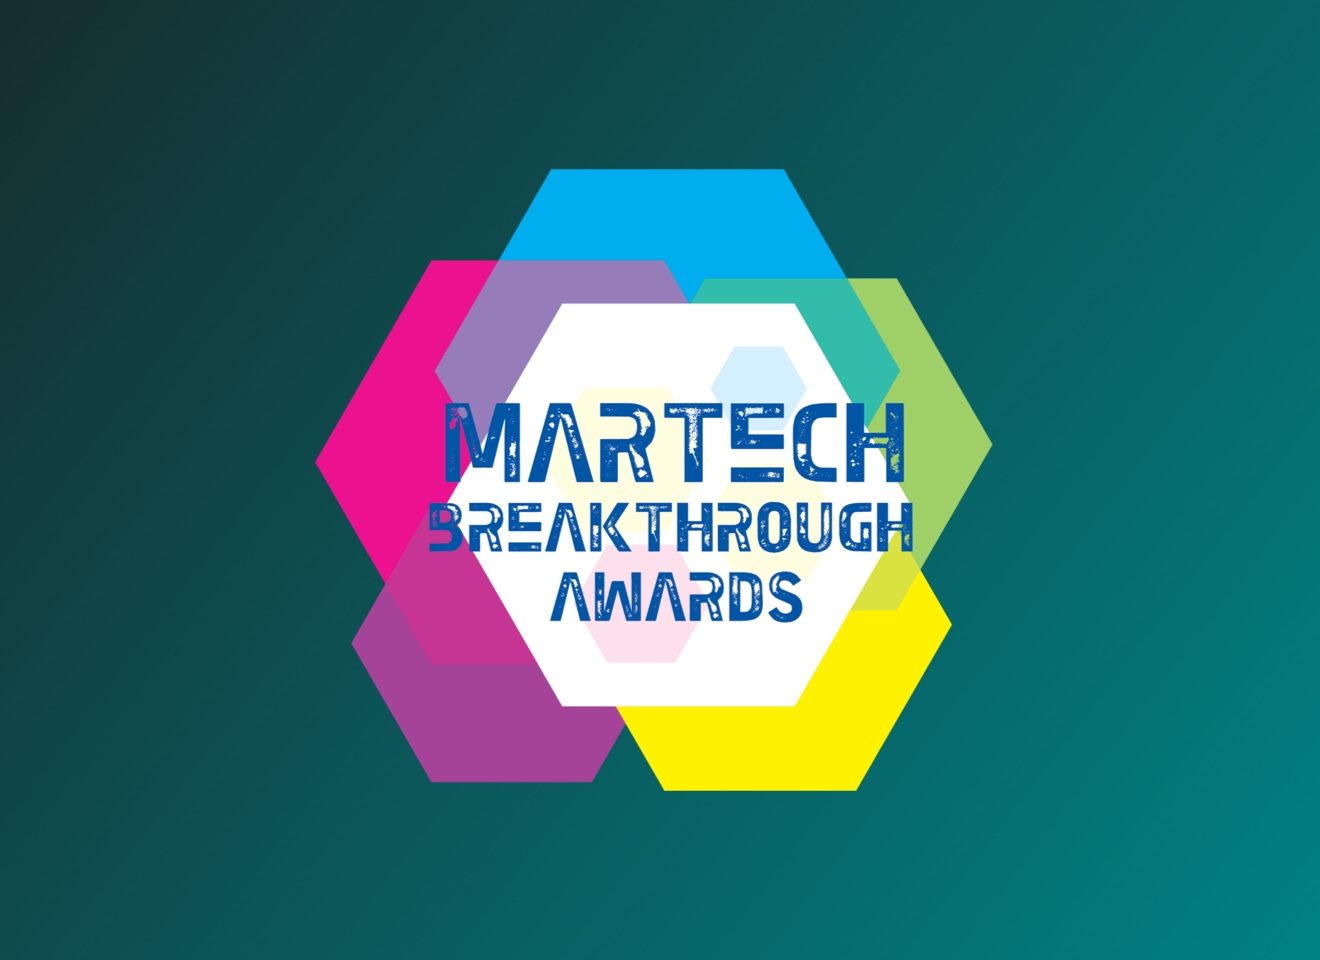 OpenExchange Named “Best Overall Event Management Solution Provider” in 5th Annual MarTech Breakthrough Awards Program - thumbnail image